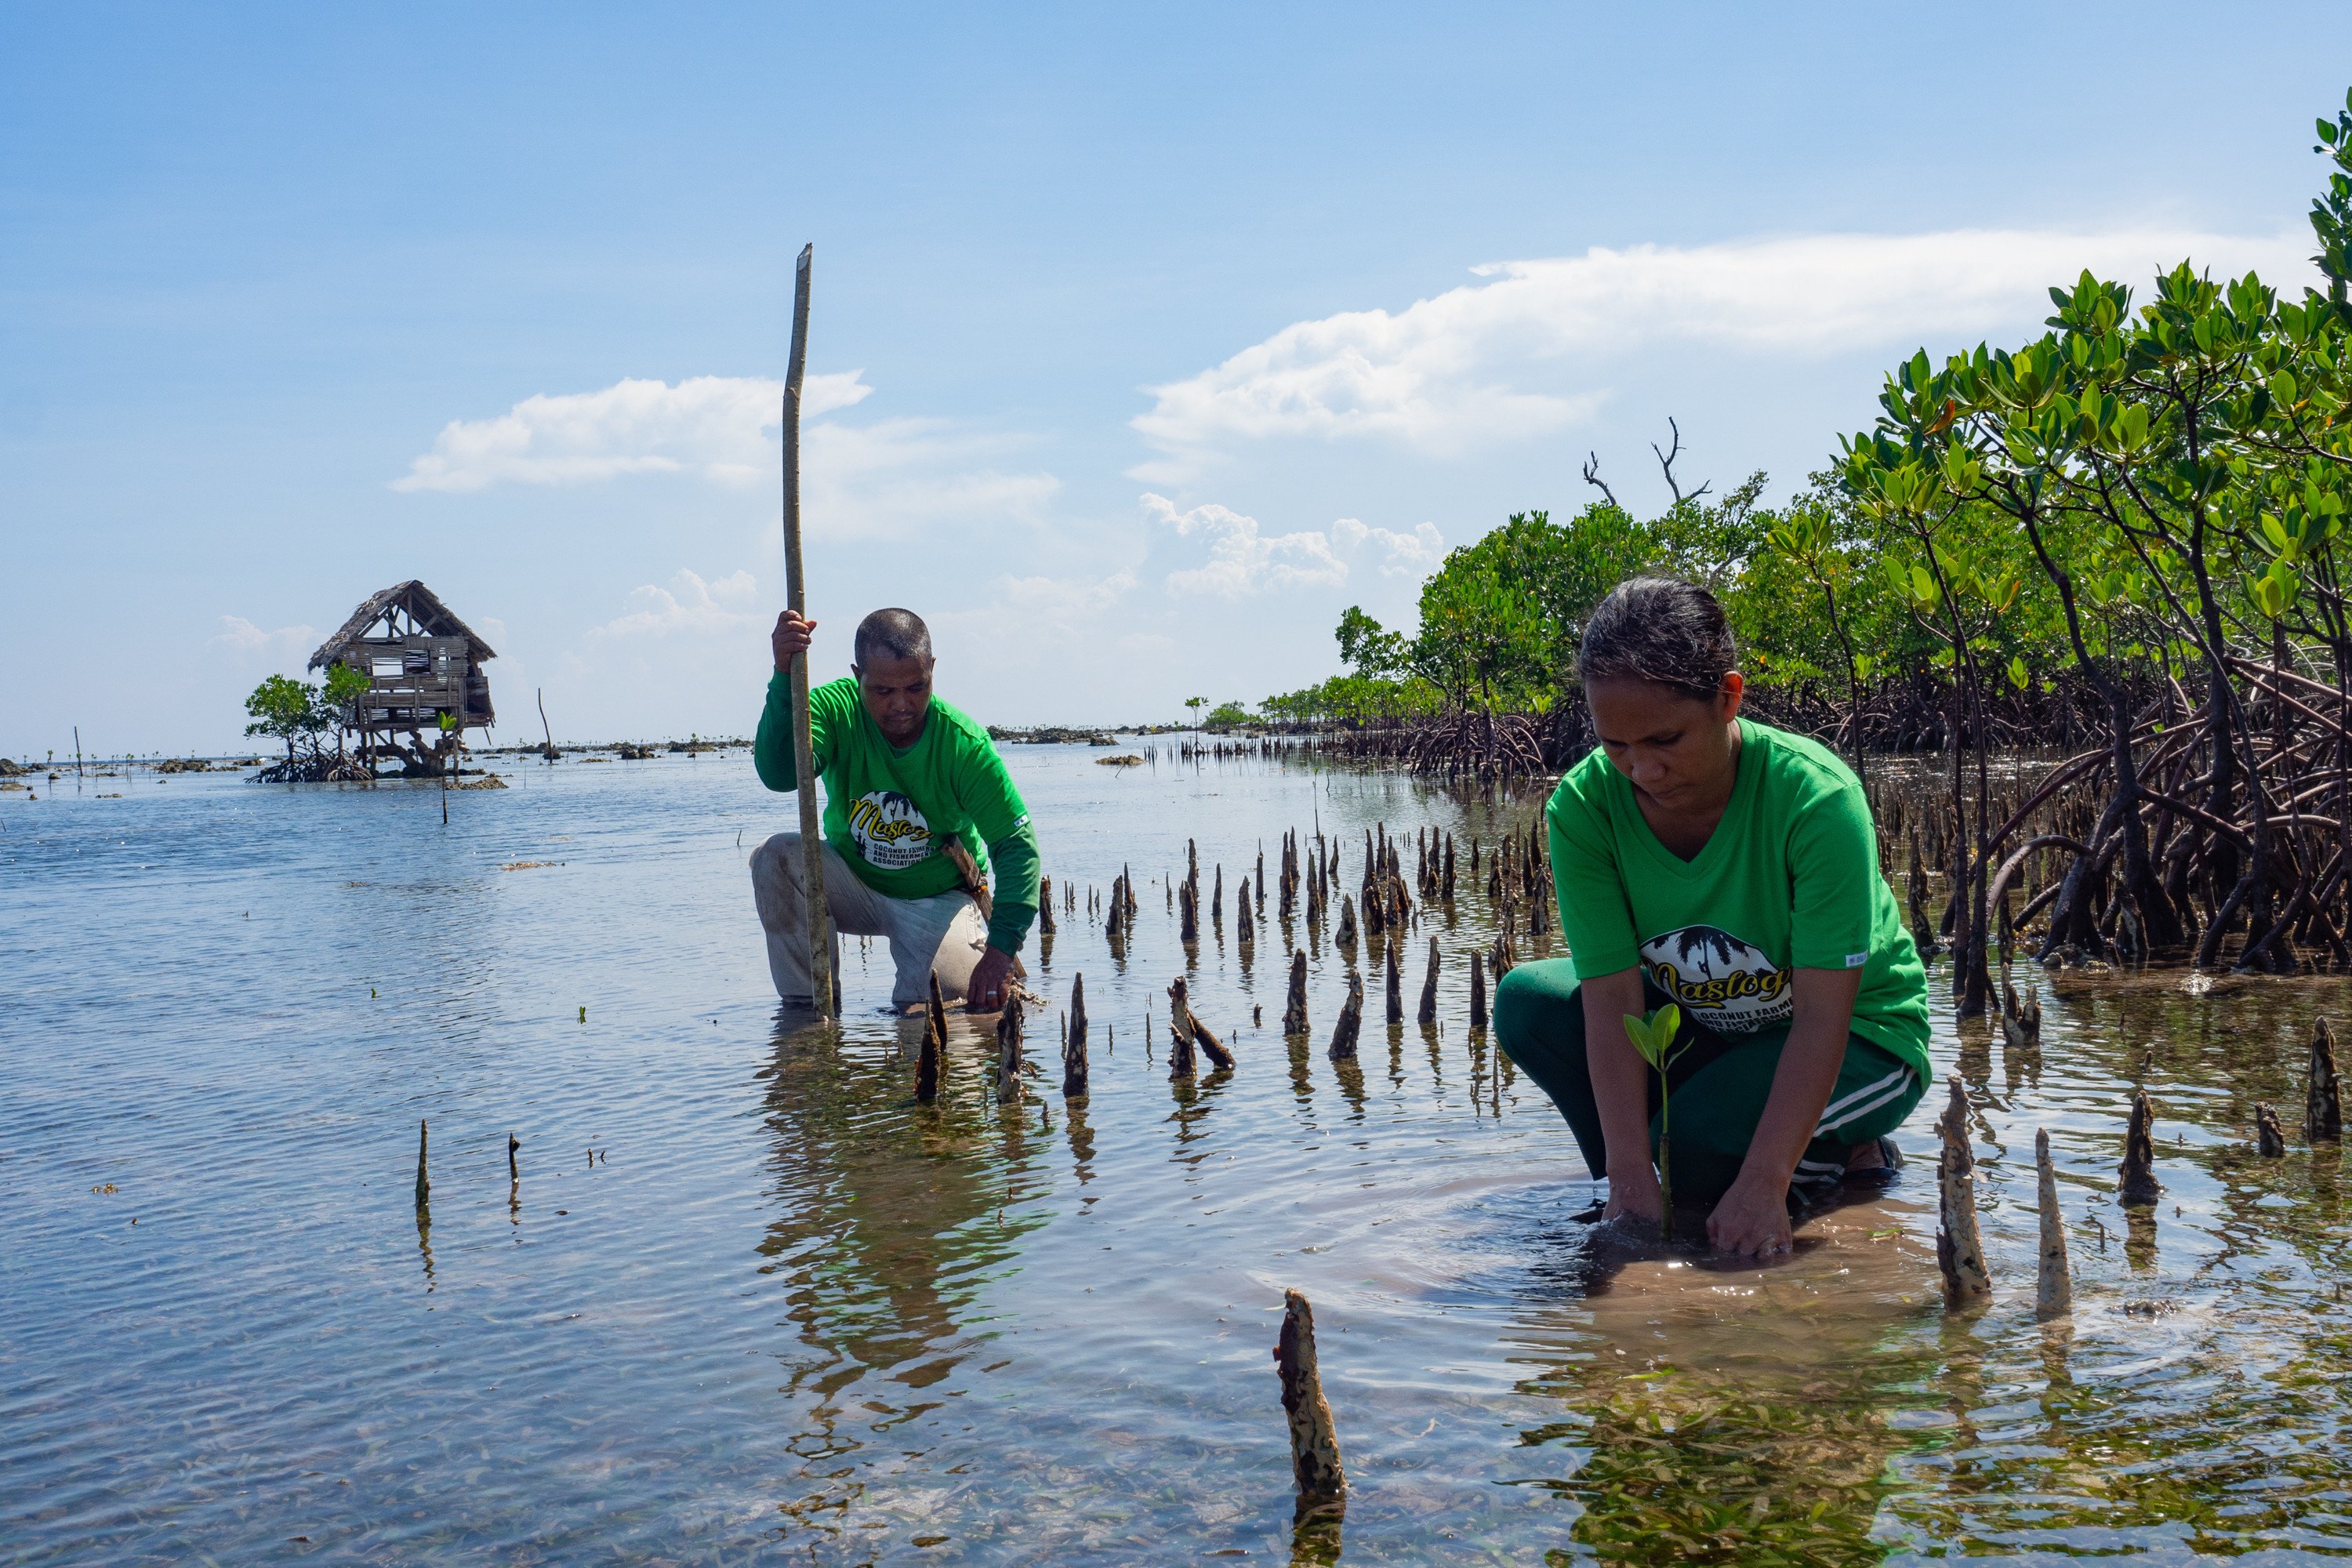 In Vietnam and the Philippines, mangroves are planted as a buffer to storm surges.